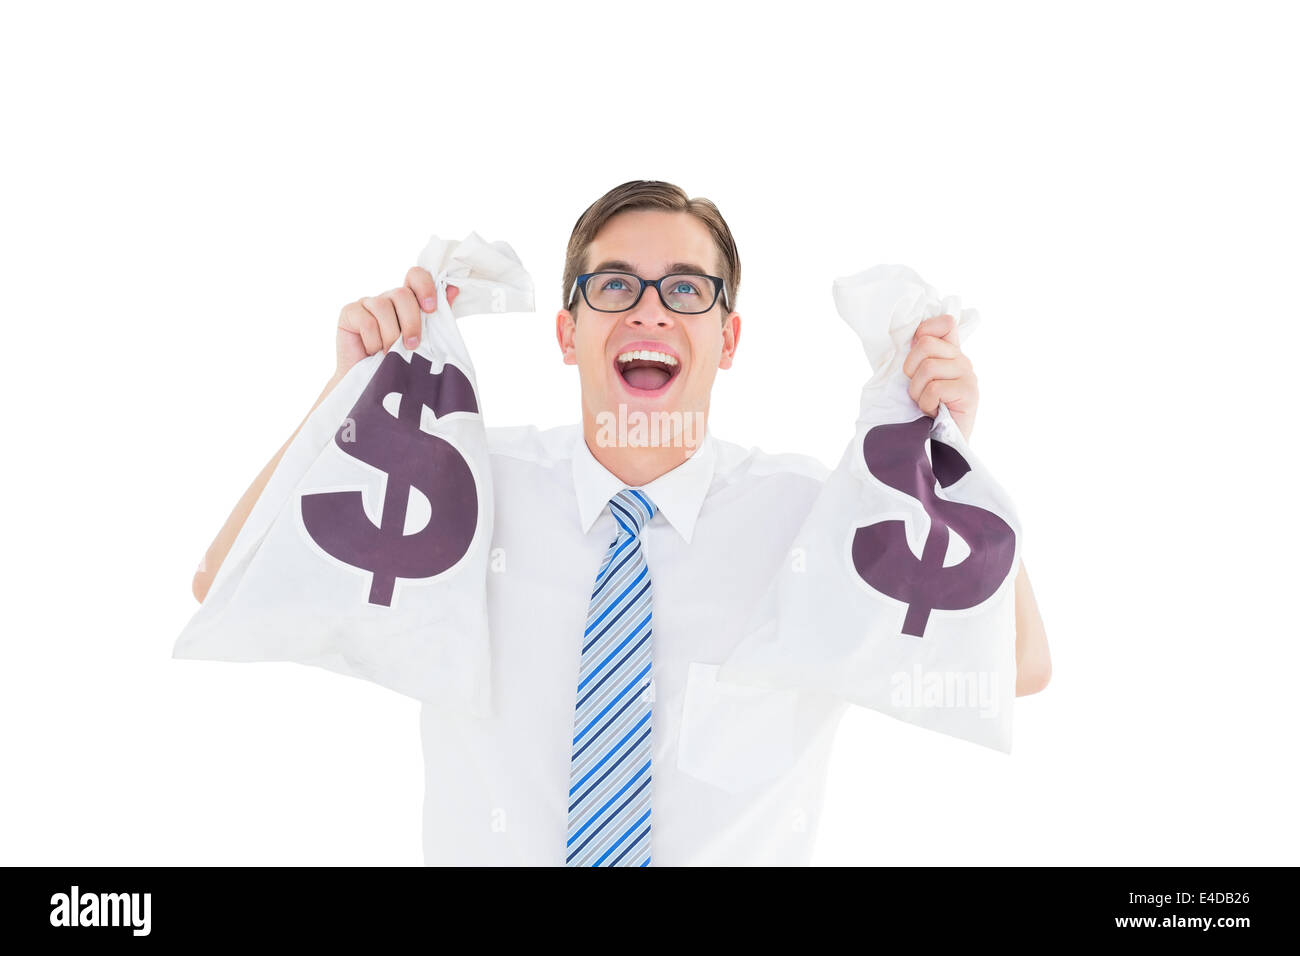 Geeky happy businessman holding bags of money Stock Photo